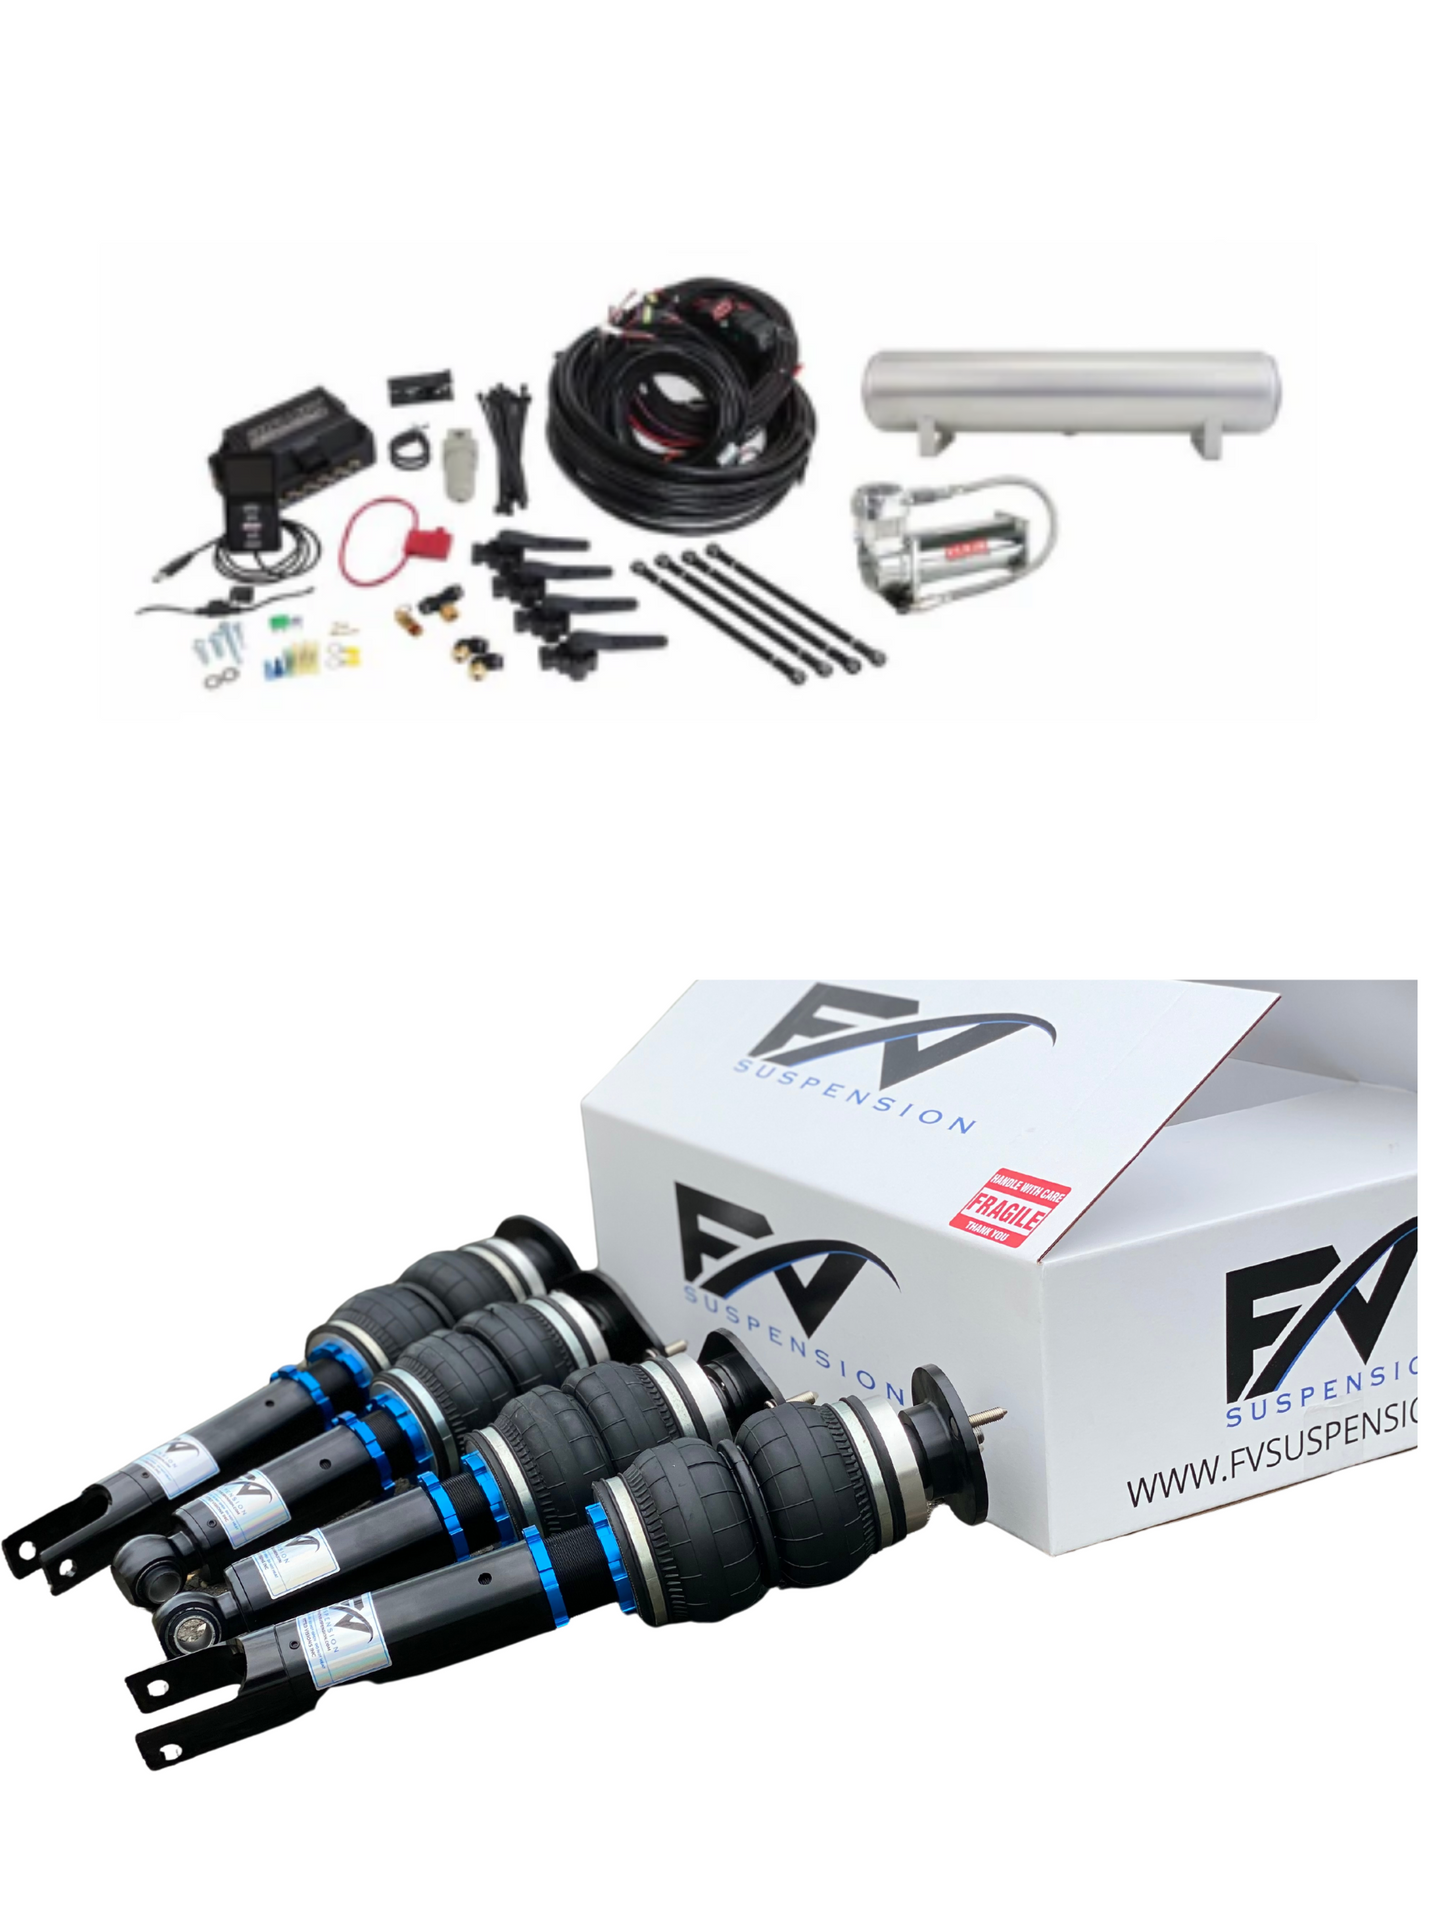 FV Suspension 3H Tier 3 Complete Air Ride kit for 07-15 Toyota Corolla Rumion - FVALtier3kit667